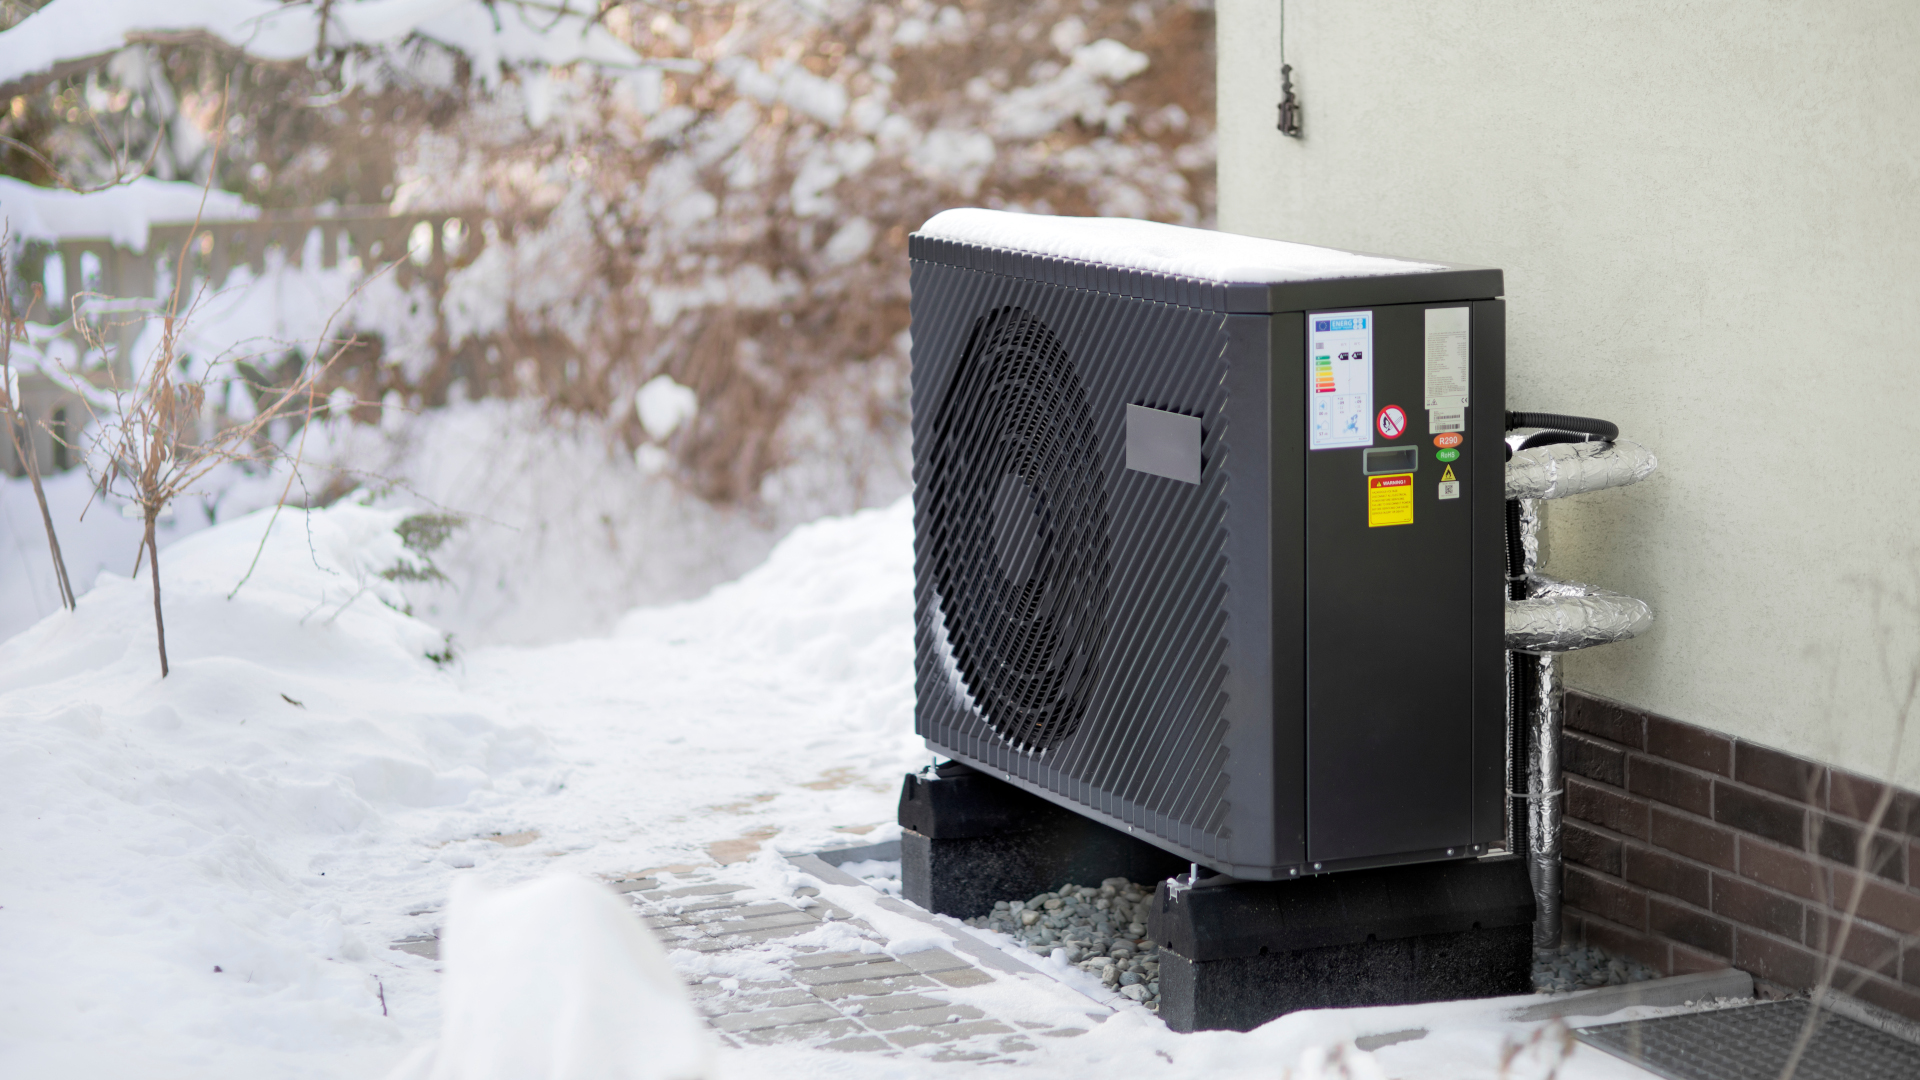 Air source heat pump in winter conditions snow cold white trees